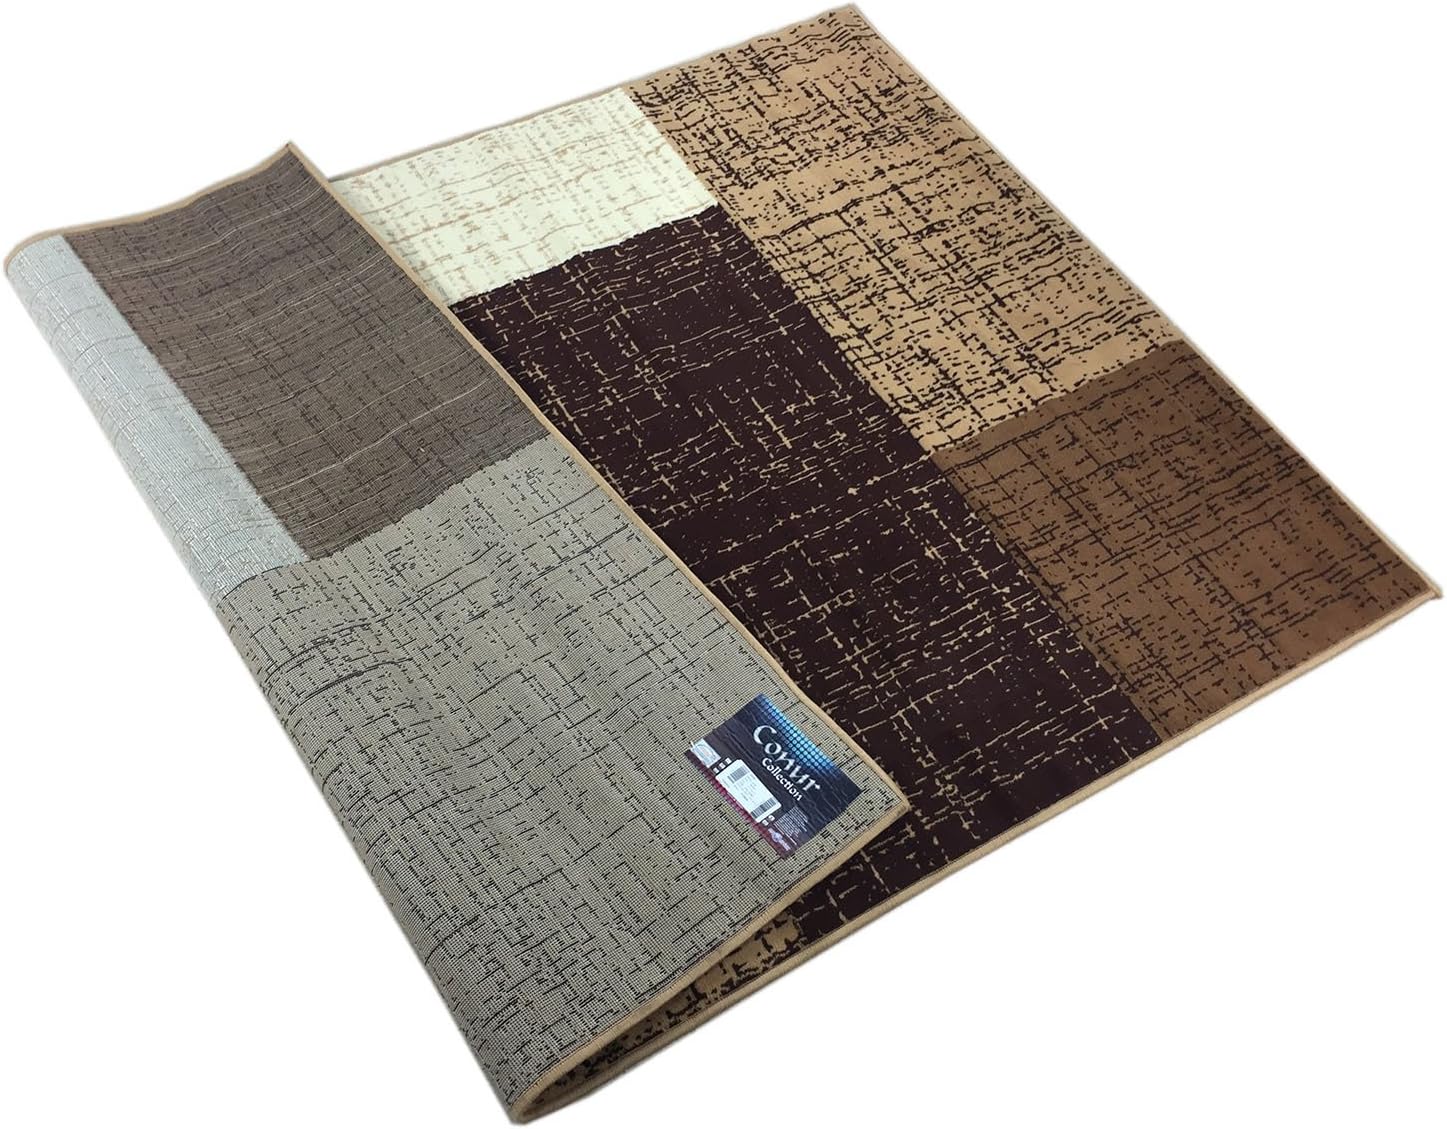 Conur Collection Squares Geometric Abstract Area Rug Rugs Modern Contemporary Area Rug 2 Color Options (Brown Beige , 4'11" x 6'11")-4